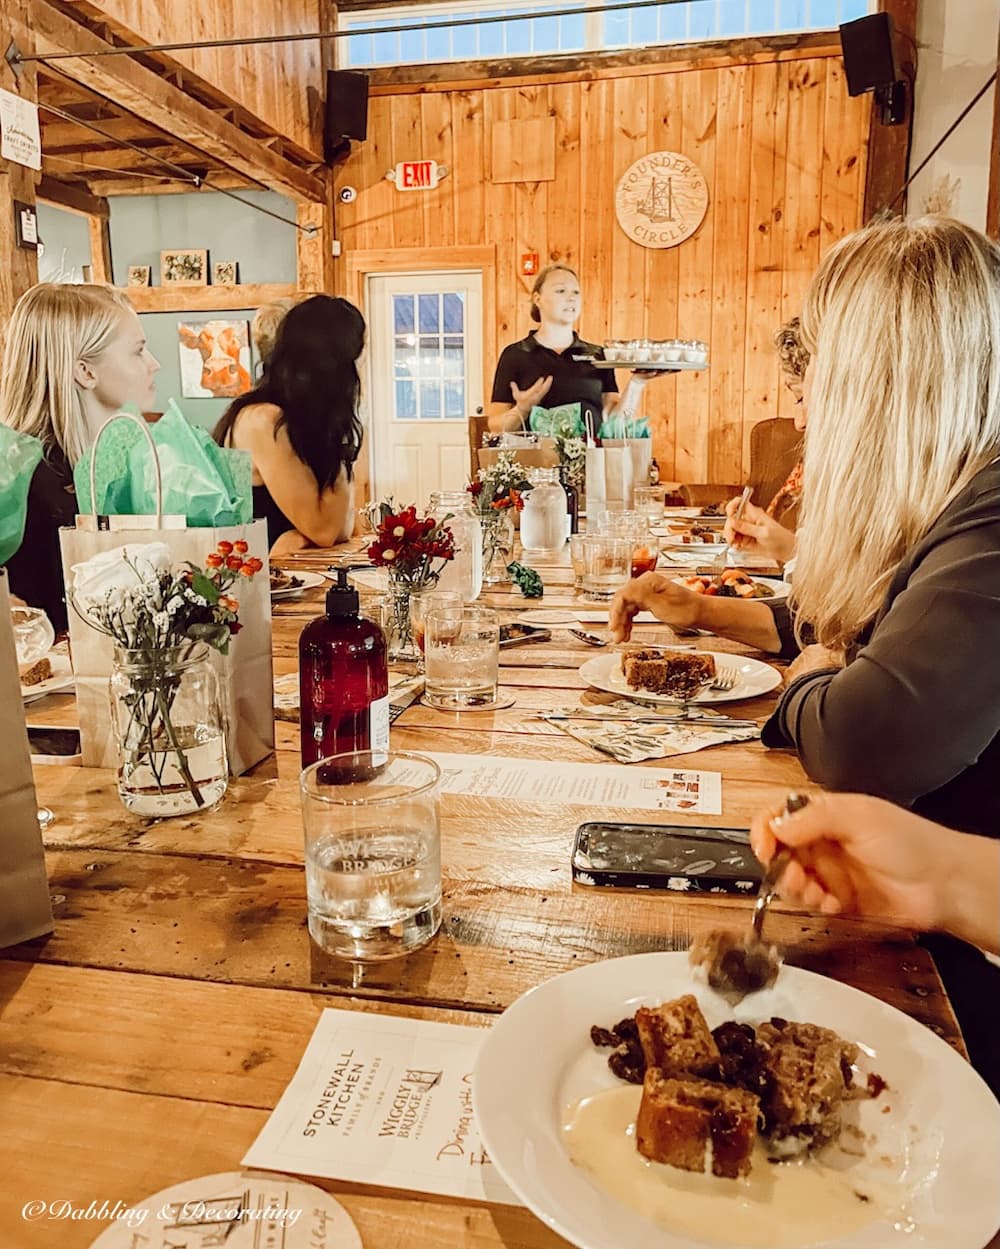 Inside with Stonewall Kitchen | What Happens on a Bloggers Retreat?